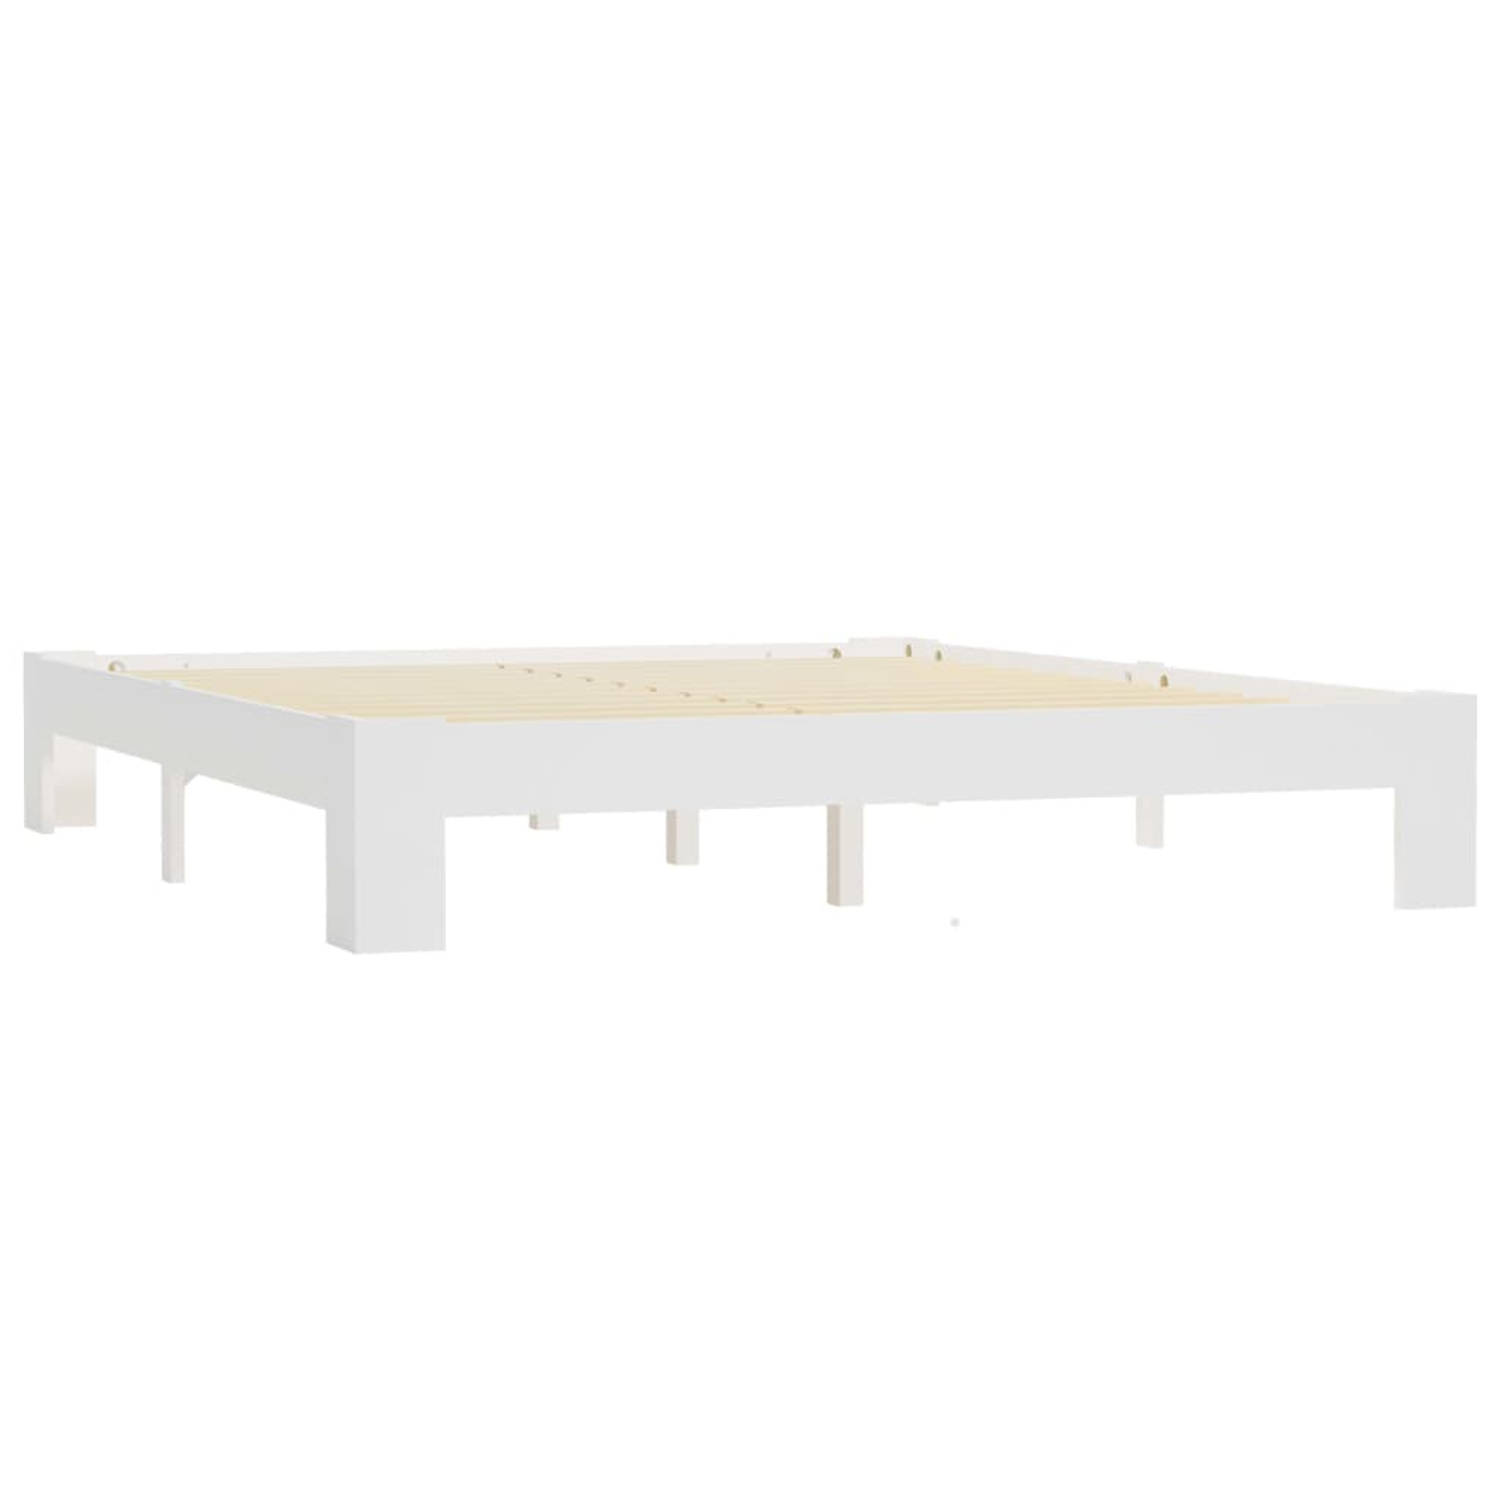 The Living Store Bedframe massief grenenhout wit 160x200 cm - Bed